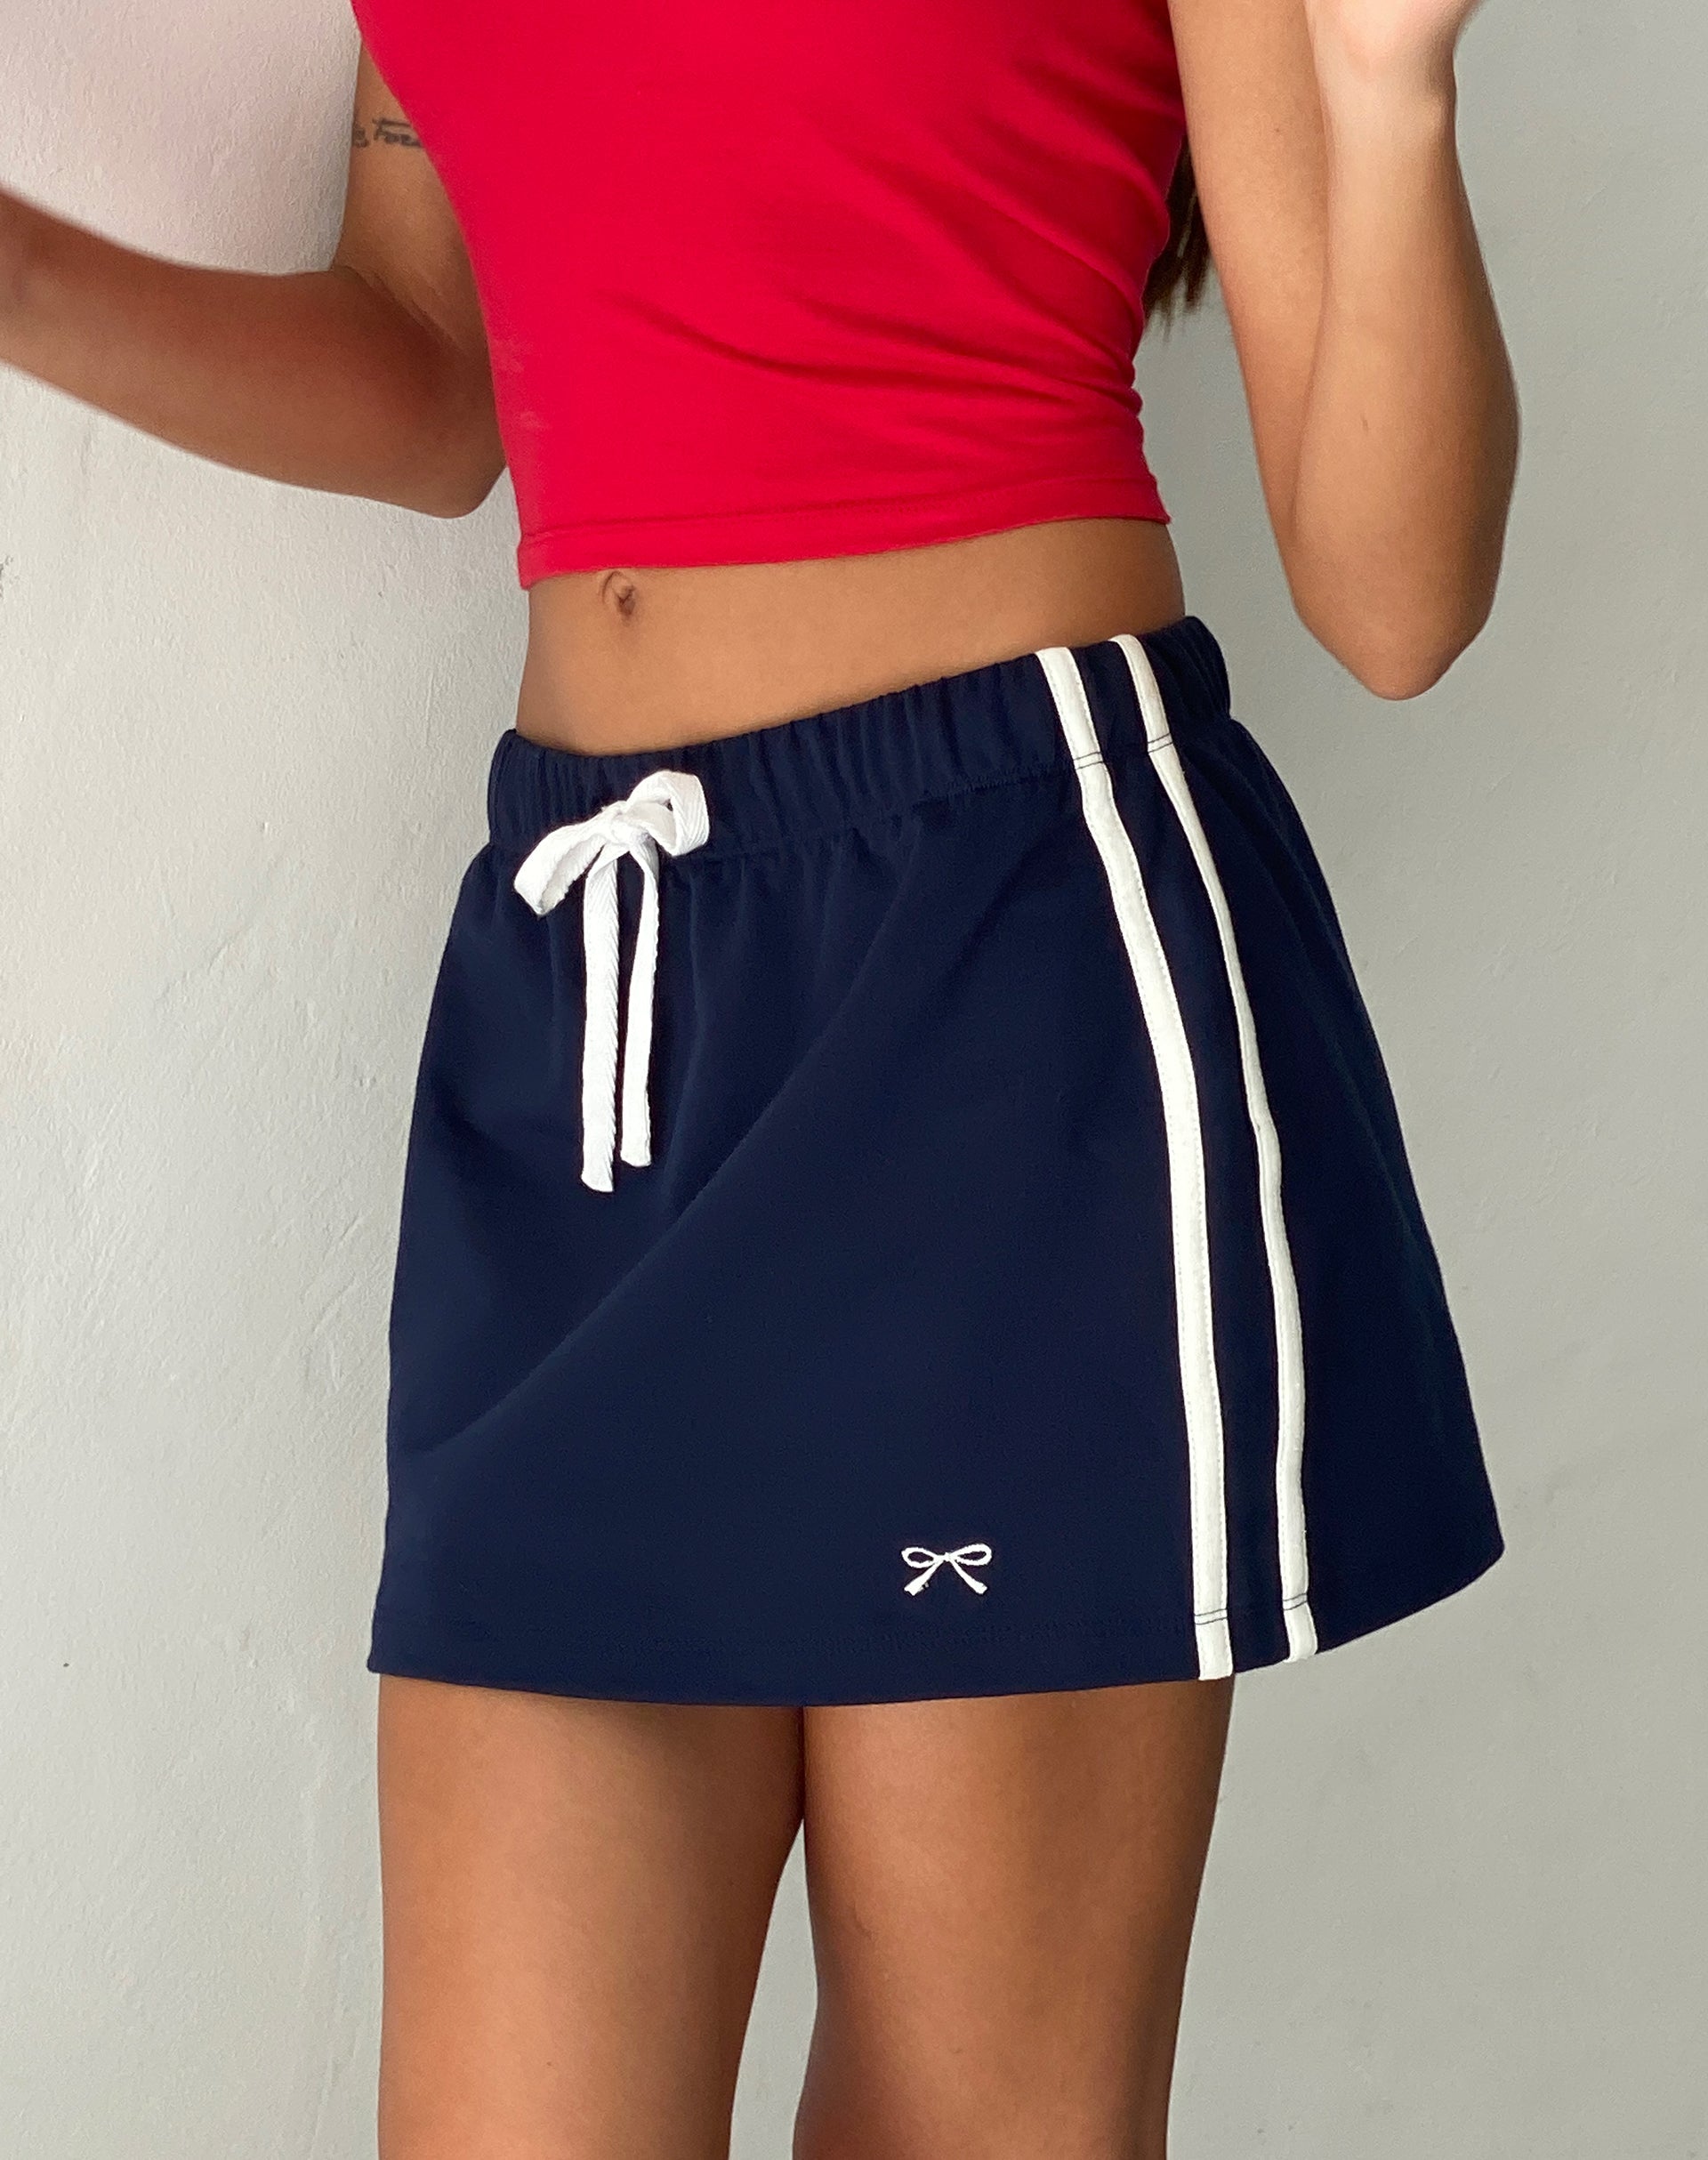 Image of Dheca Mini Skirt in Navy with White Side Stripe